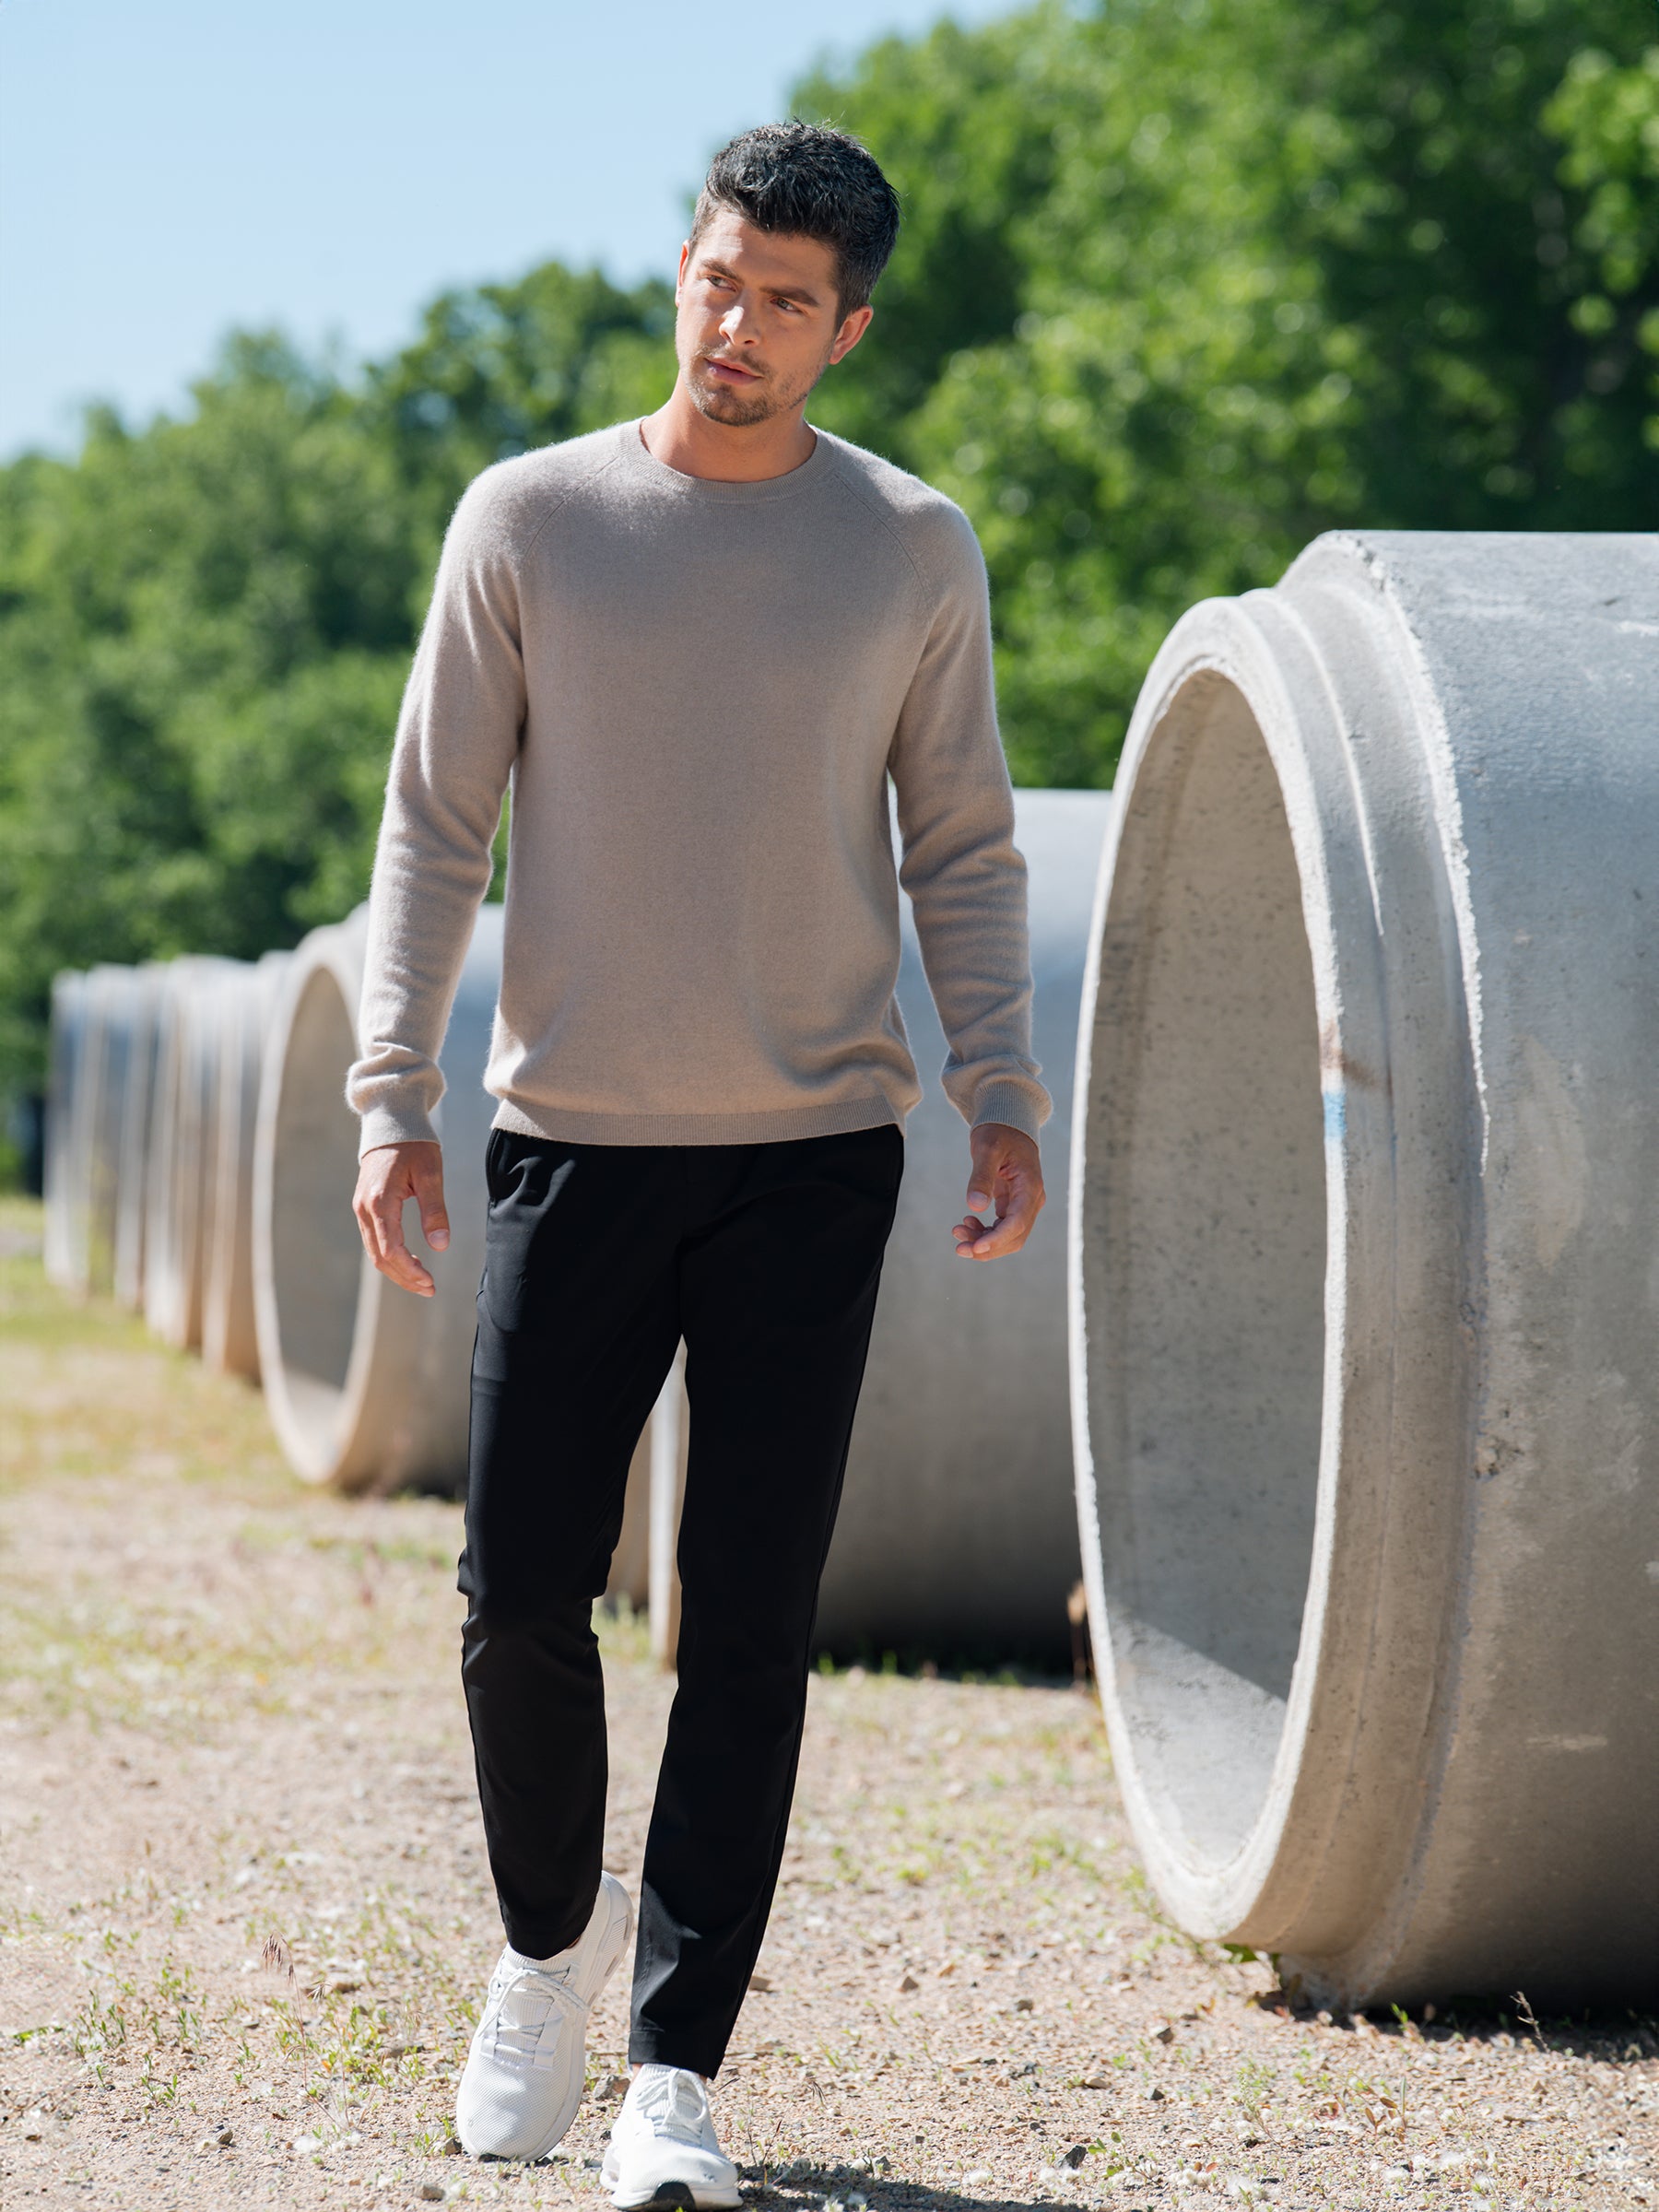 A man wearing a Cozy Earth Men's Crewneck Sweater in beige and black pants walks outdoors near large concrete pipes. He has dark hair and facial hair. Trees and a blue sky are visible in the background. As he strolls along a gravel path, he glances slightly to his left. |Color:Sandstone